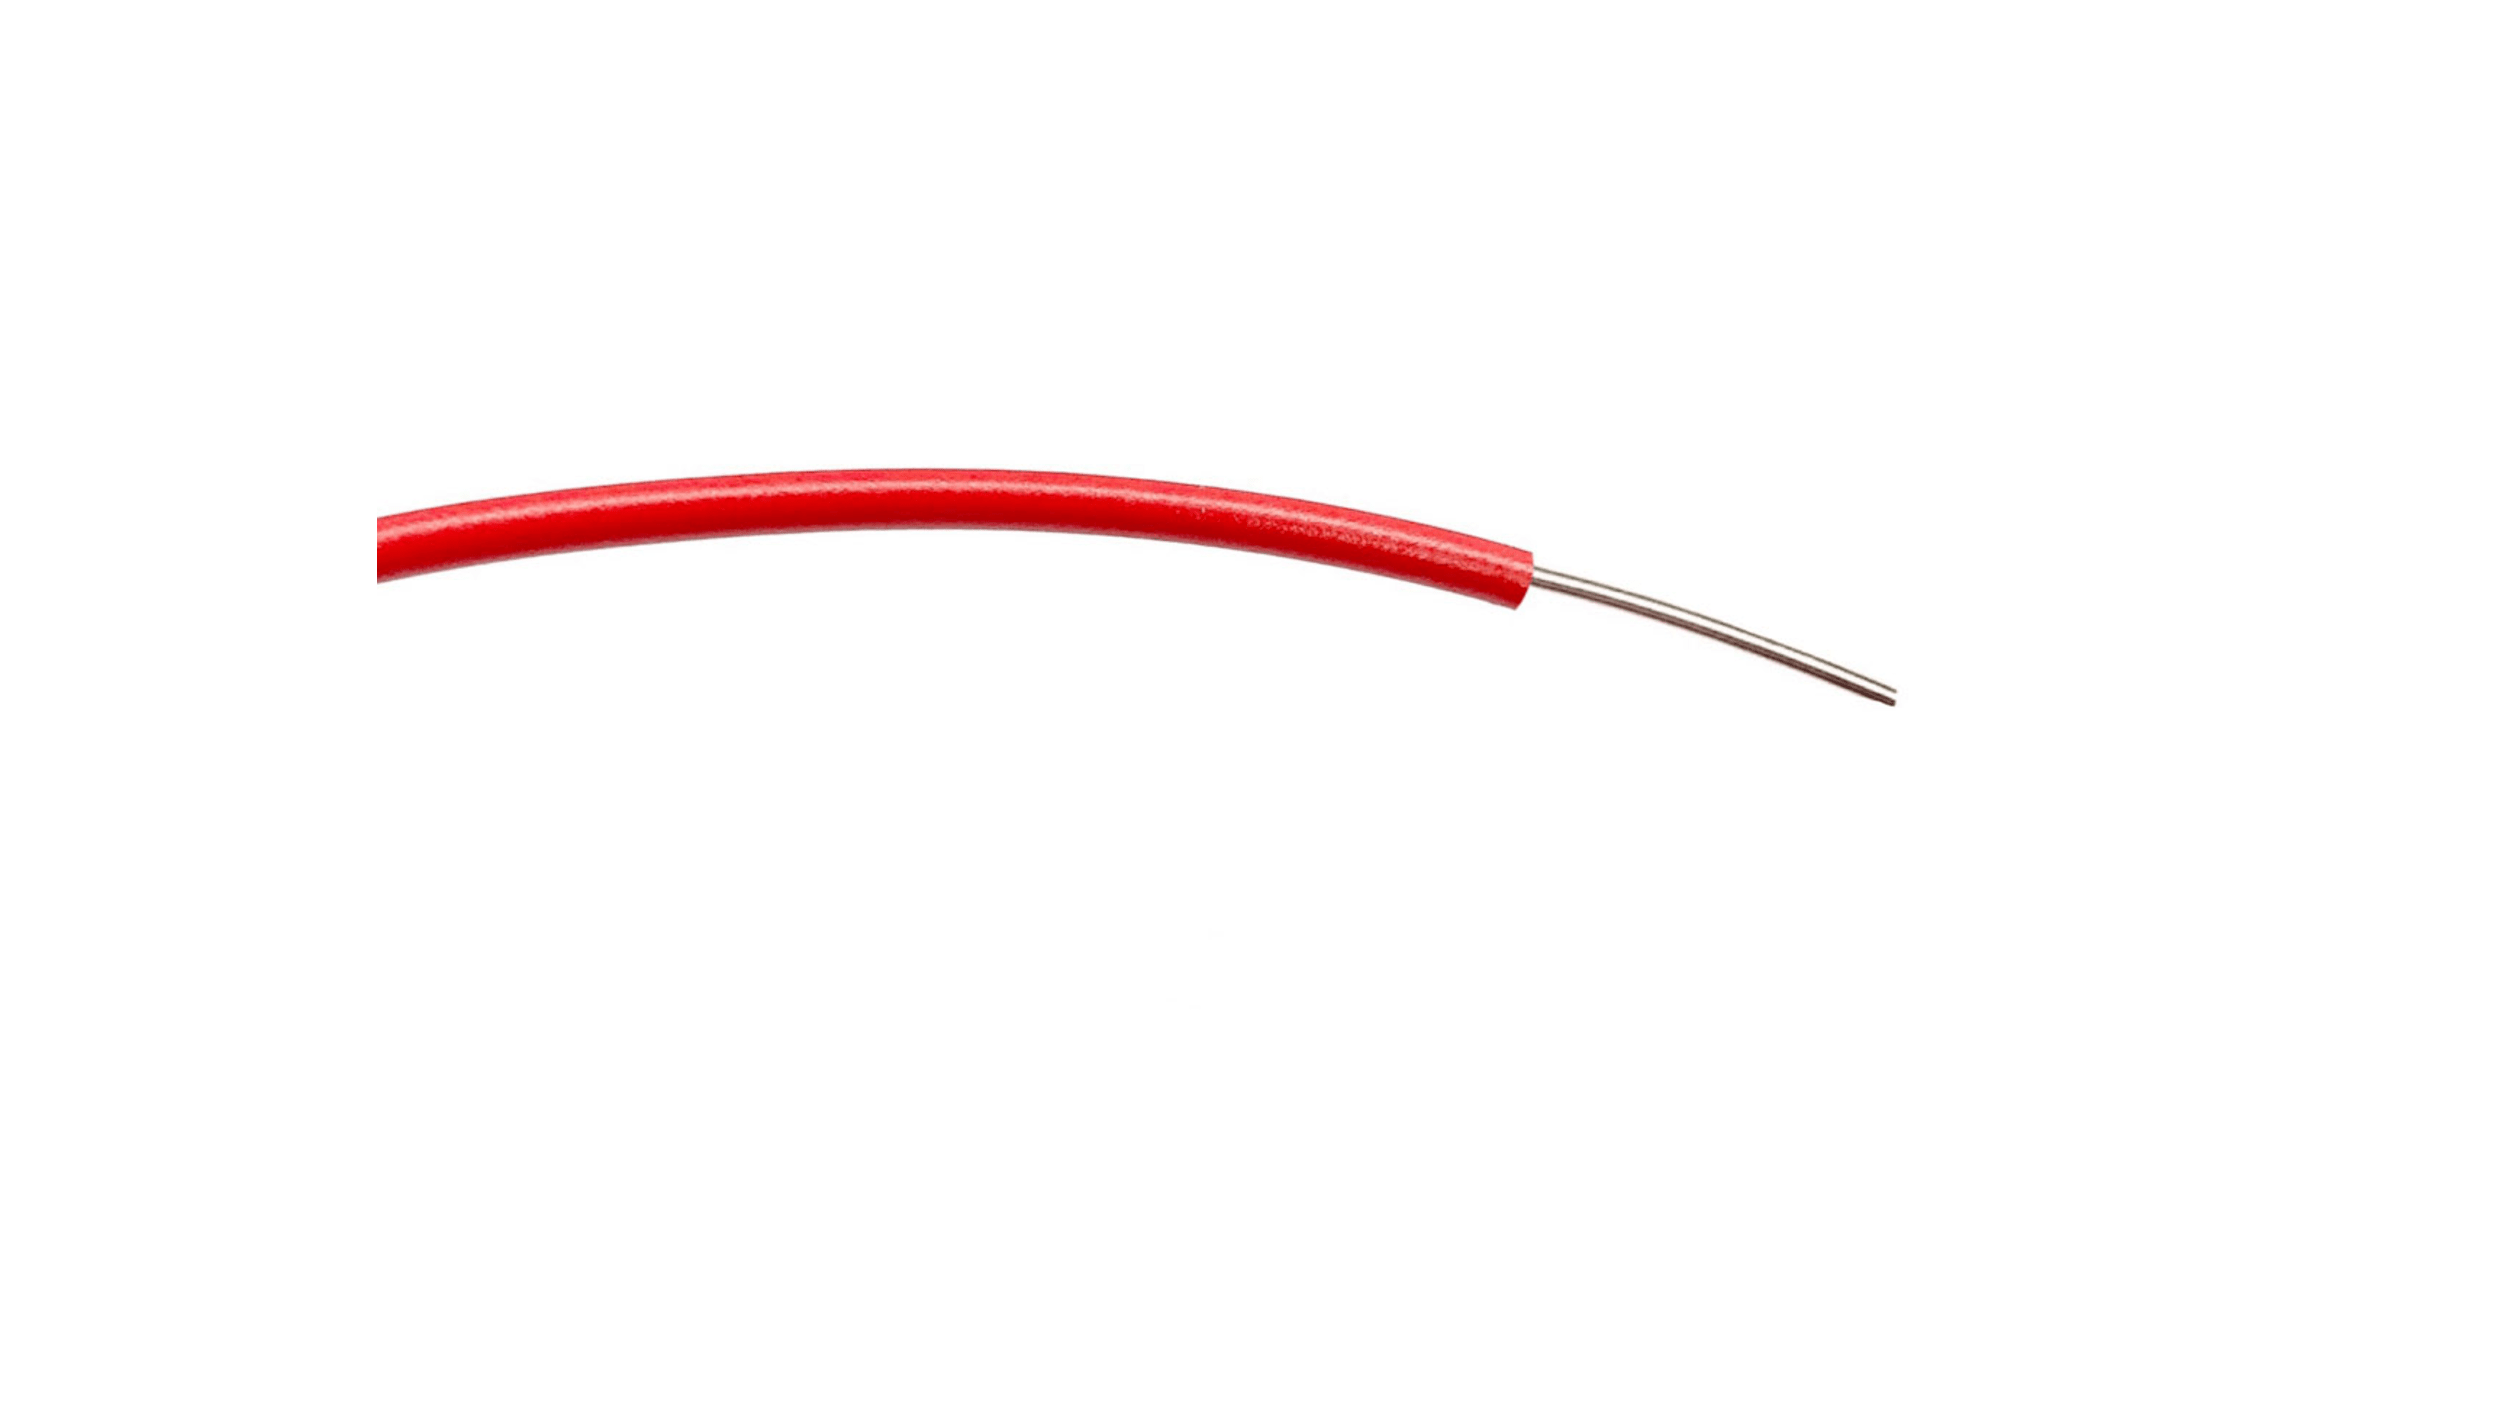 RS PRO Red 0.26 mm² Hook Up Wire, 23 AWG, 1/0.6 mm, 100m, PVC